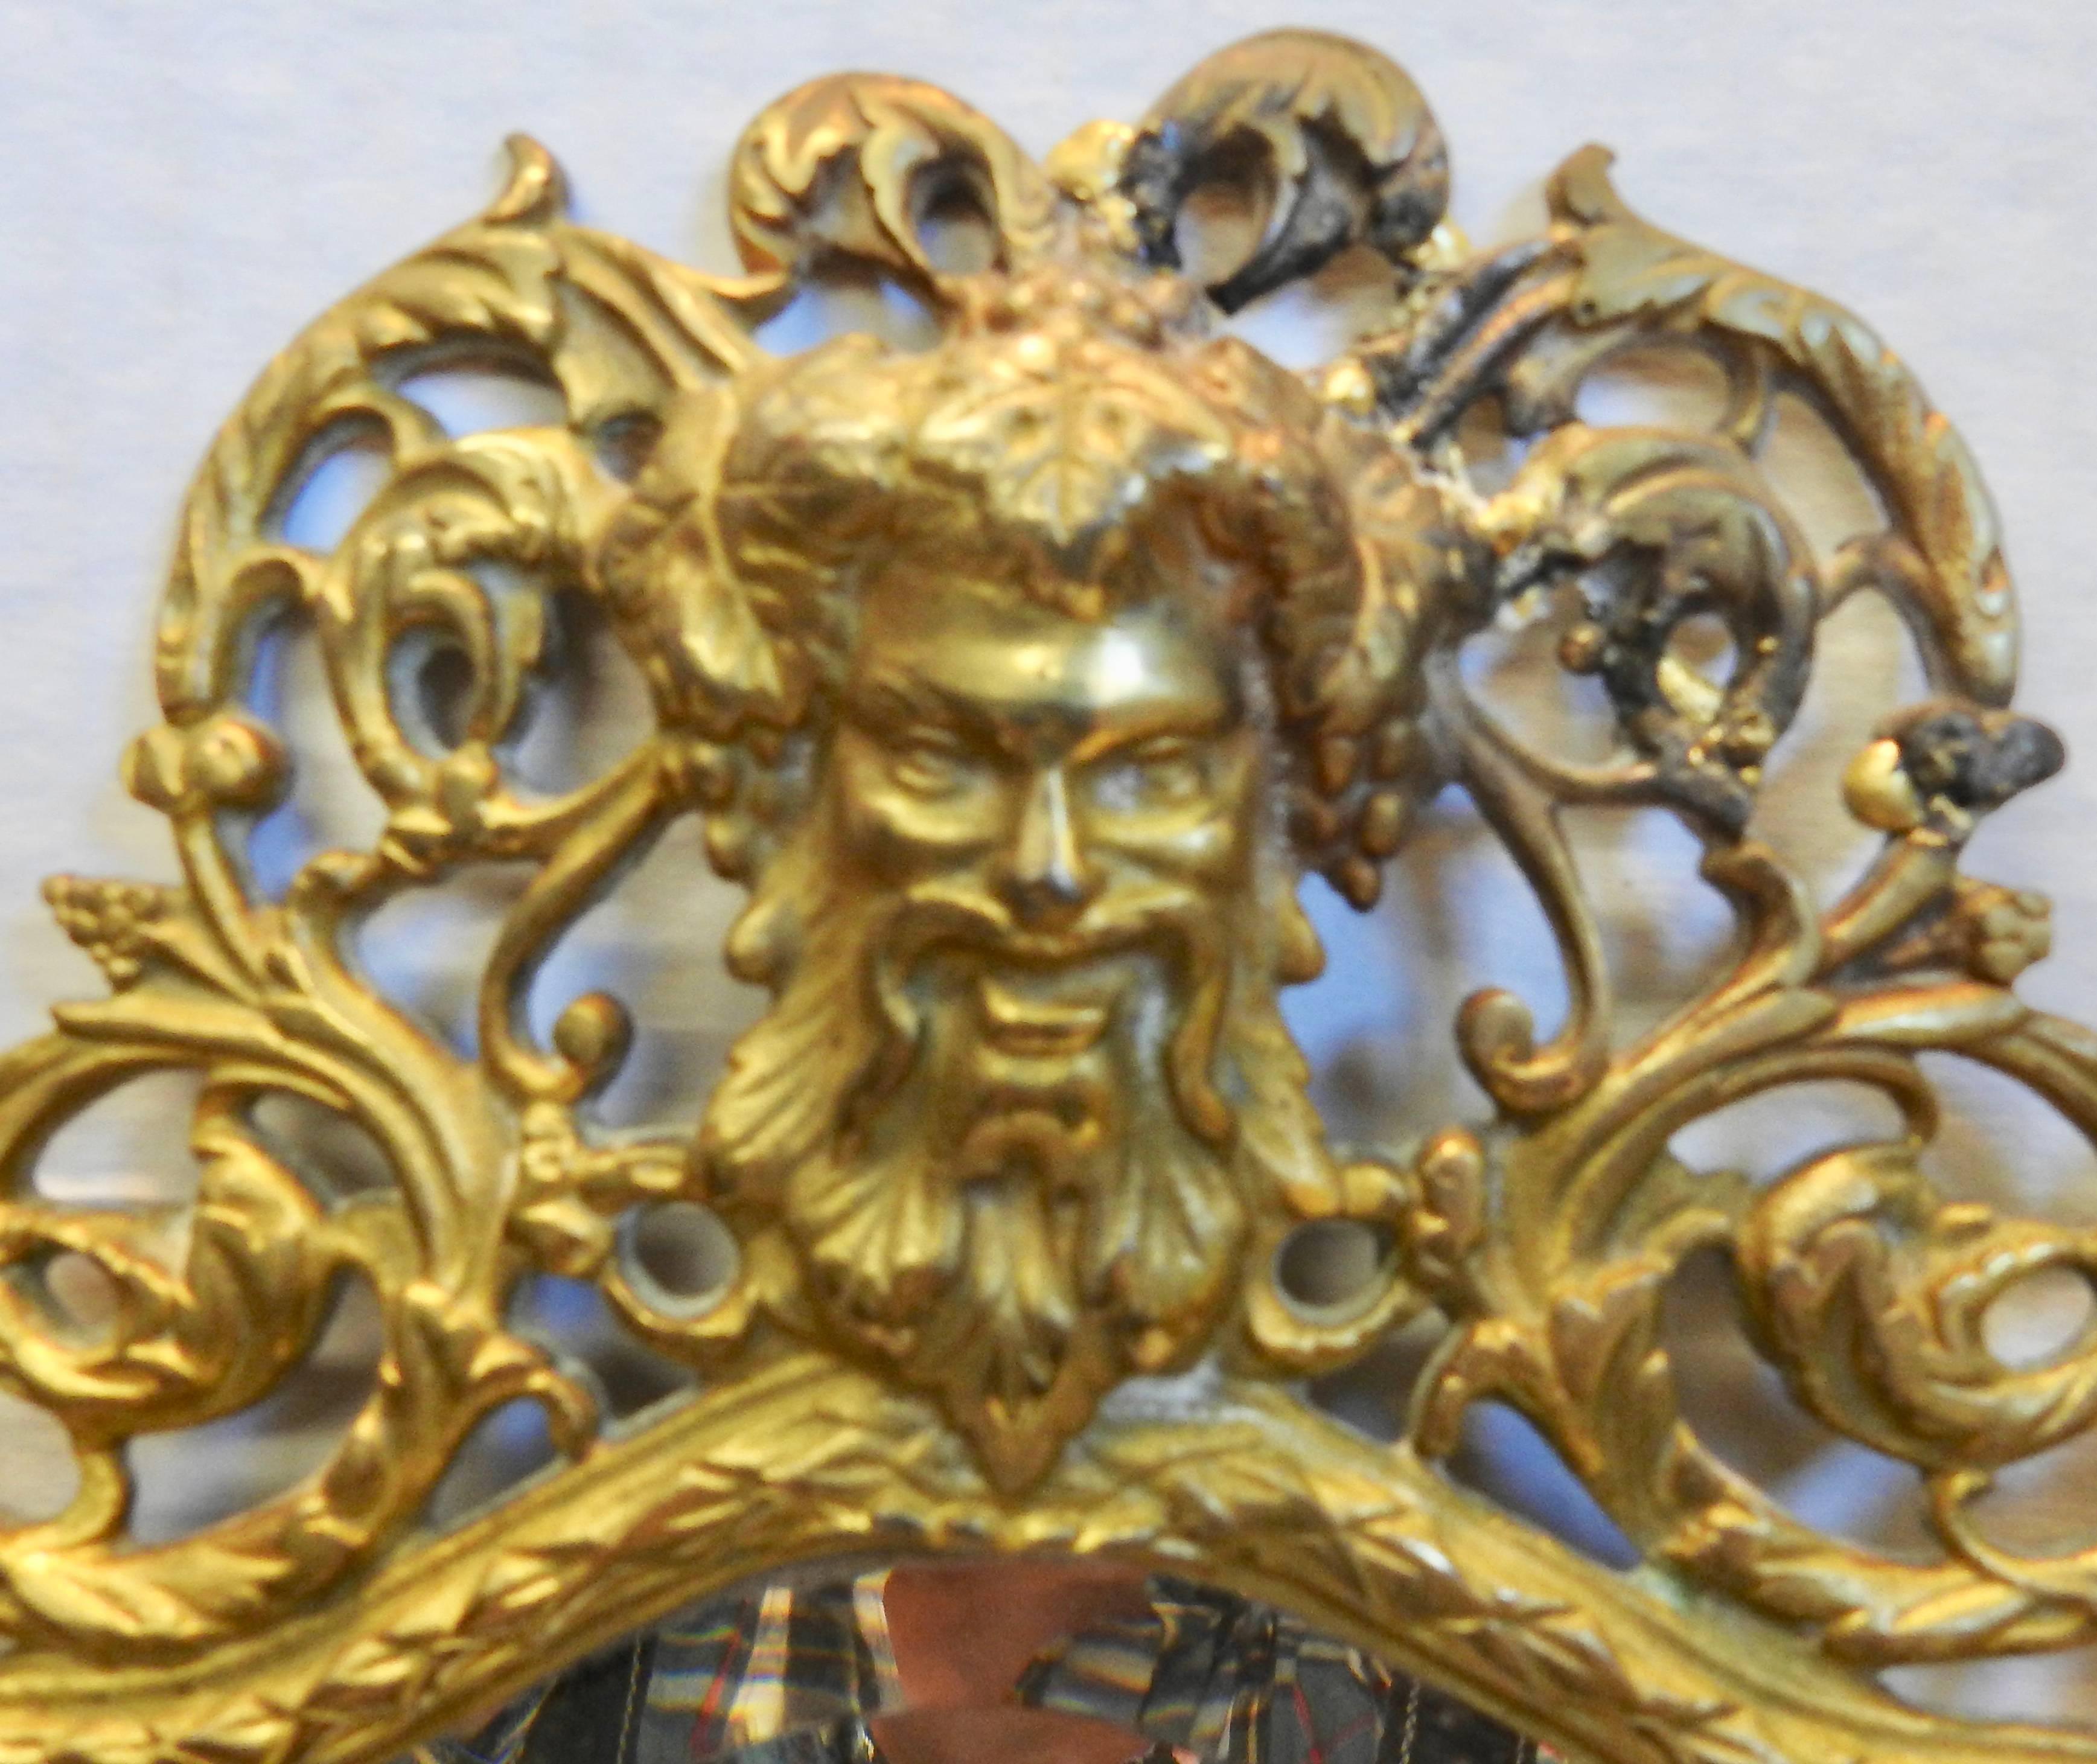 A lovely wall sconce by Bradley and Hubbard with a beveled mirror. There are two candleholders that have the holes drilled to add prisms if you desire. Ornate swirls form the frame for the mirror with a Greek God at the top. The brass is marked on